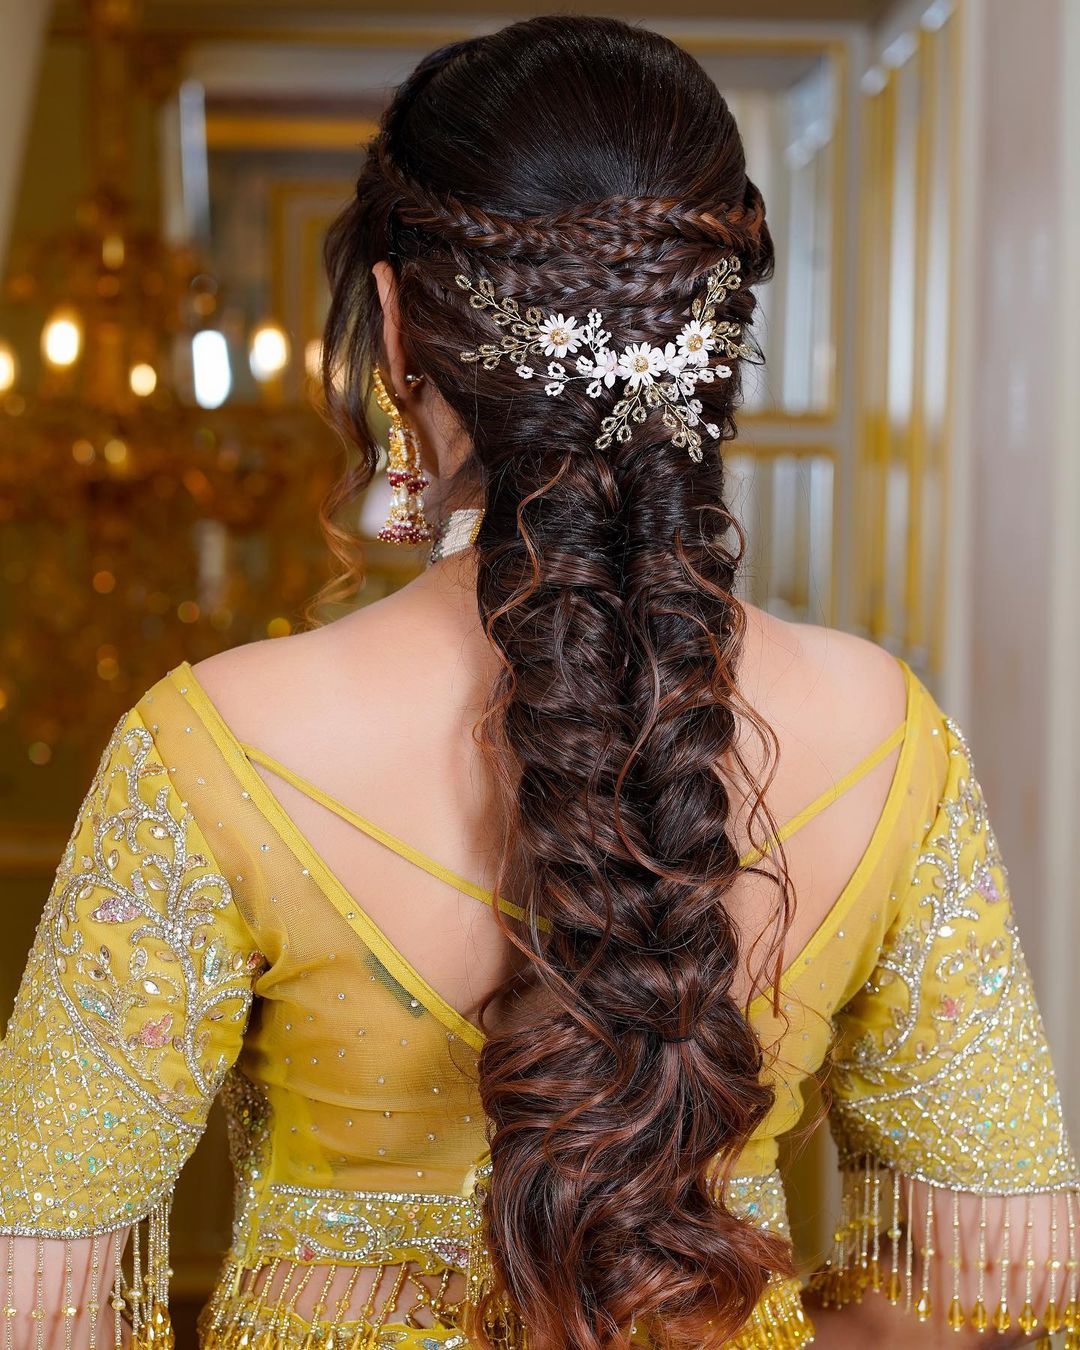 hairstyle with lehenga wedding | hairstyle with lehenga choli | hairstyle  with lehenga low buns | Engagement hairstyles, Front hair styles, Medium hair  styles